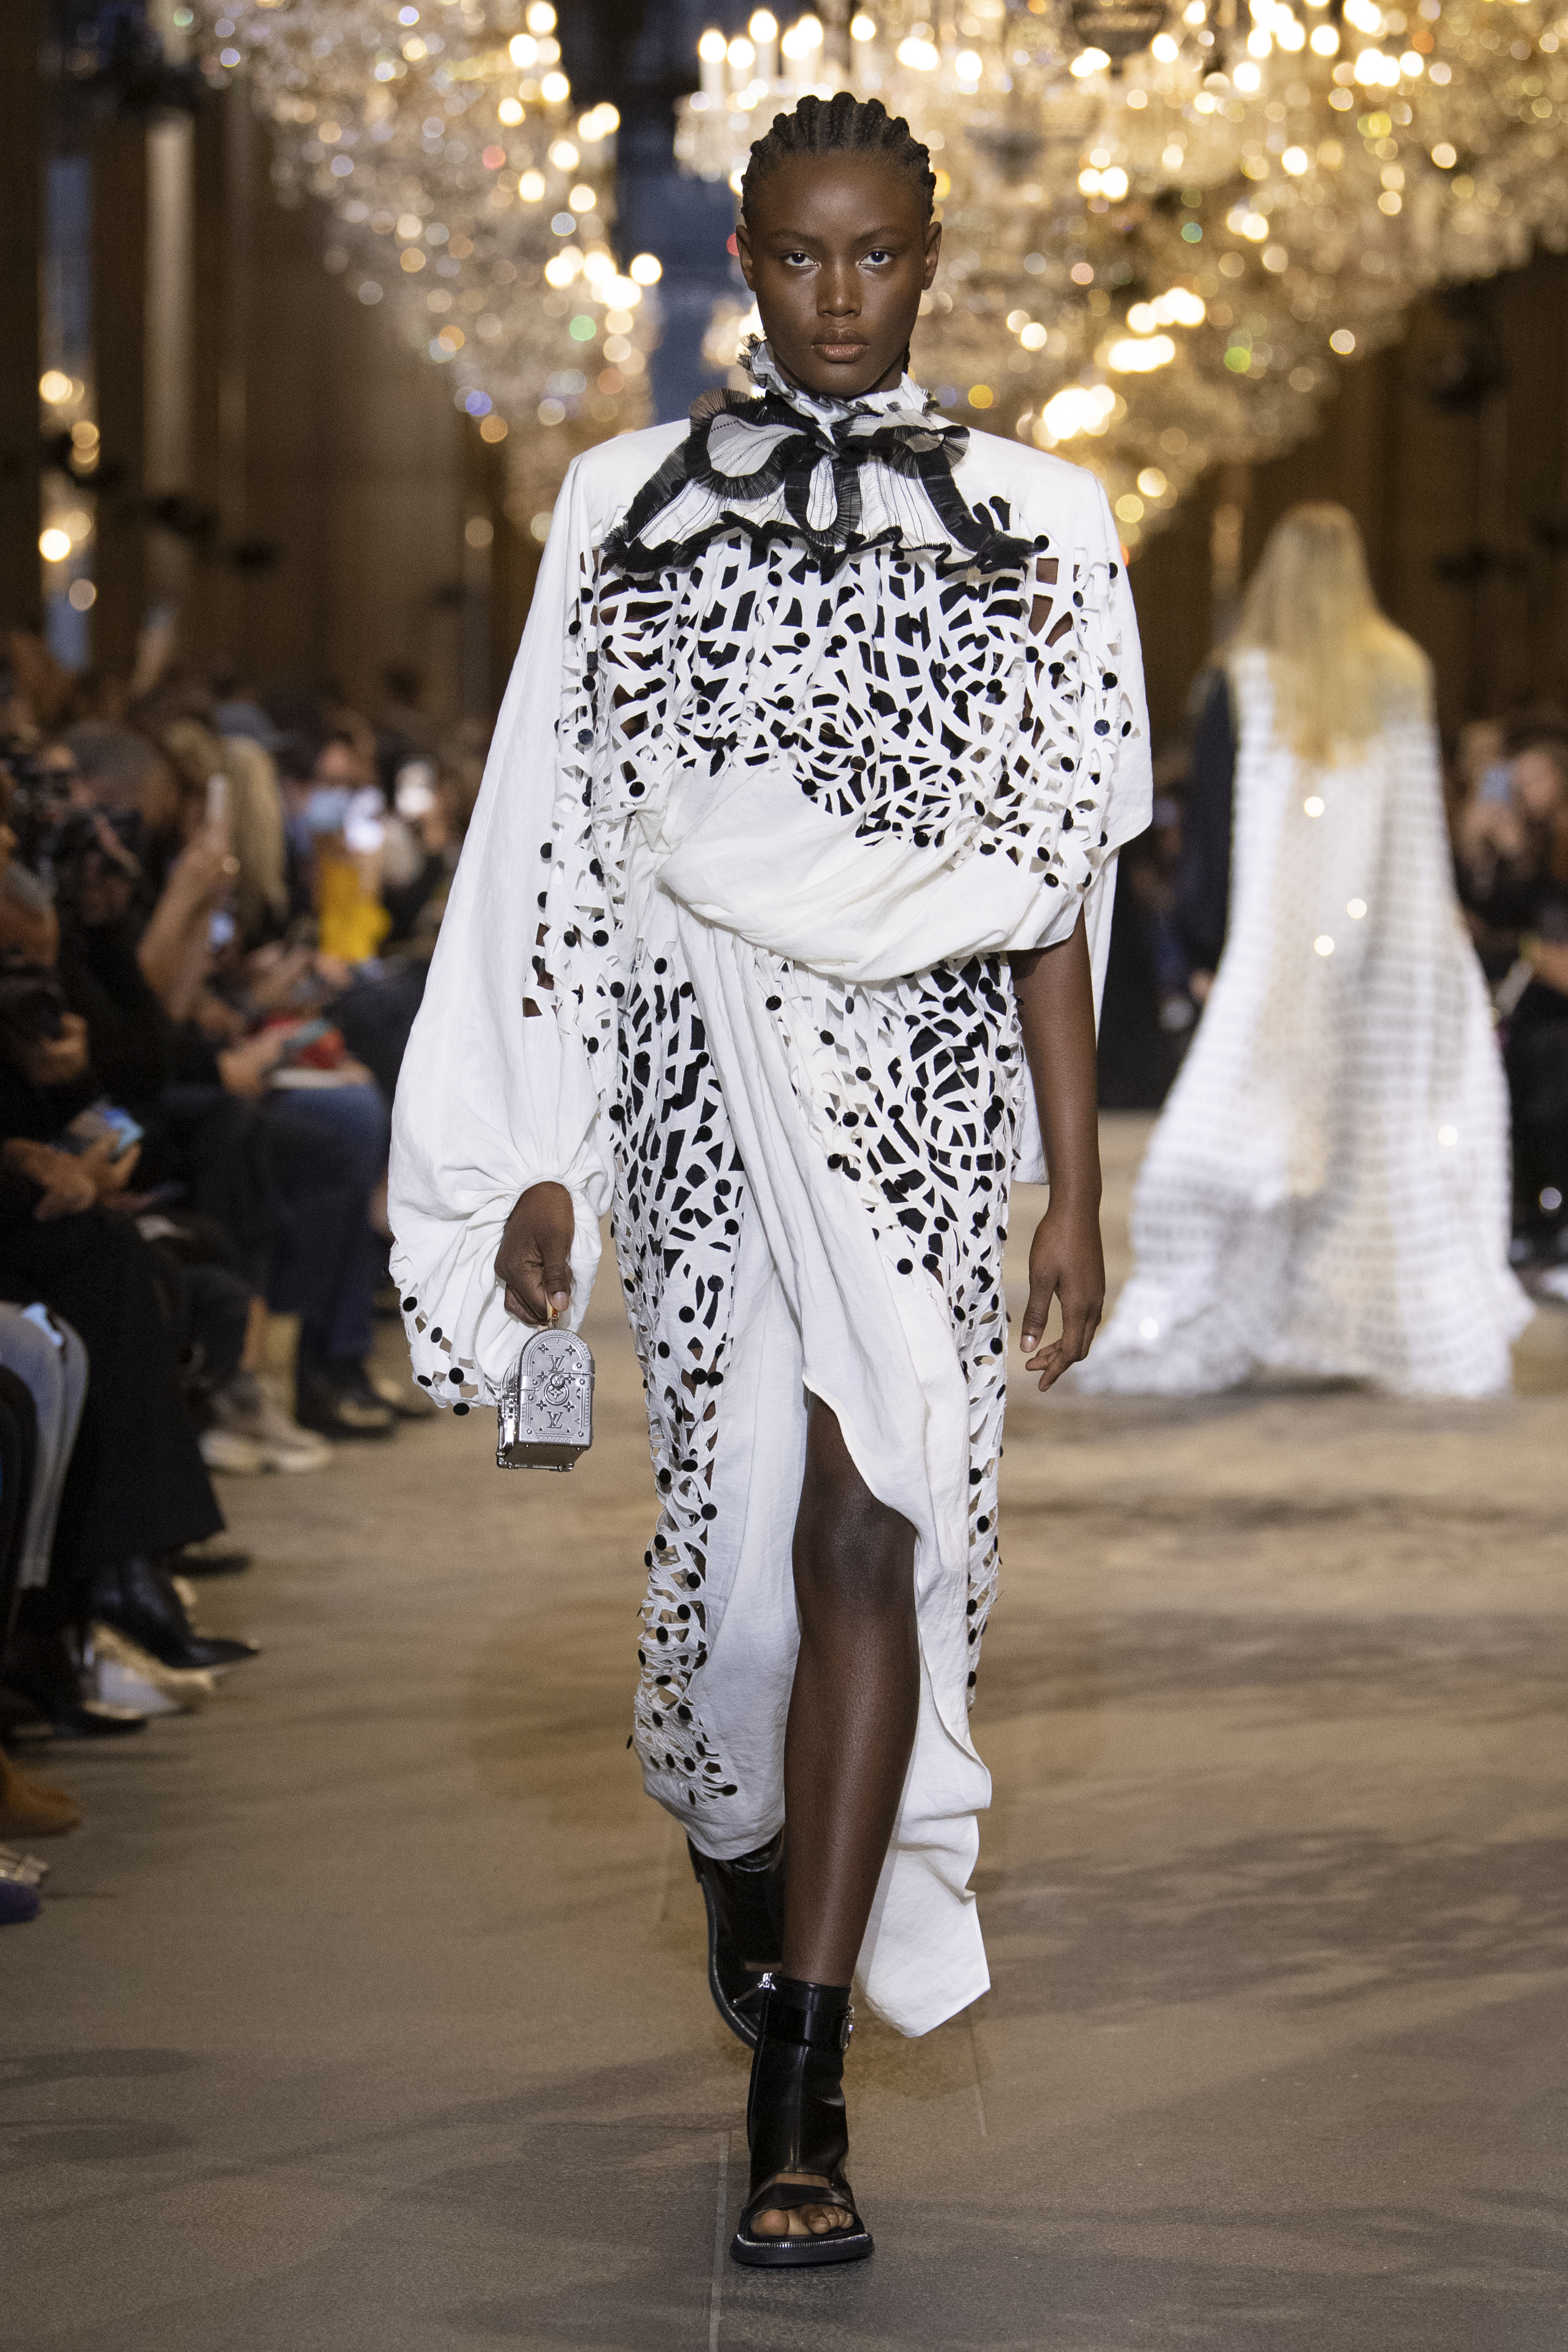 A look from Louis Vuitton's Spring 2022 Collection. Photo Credit